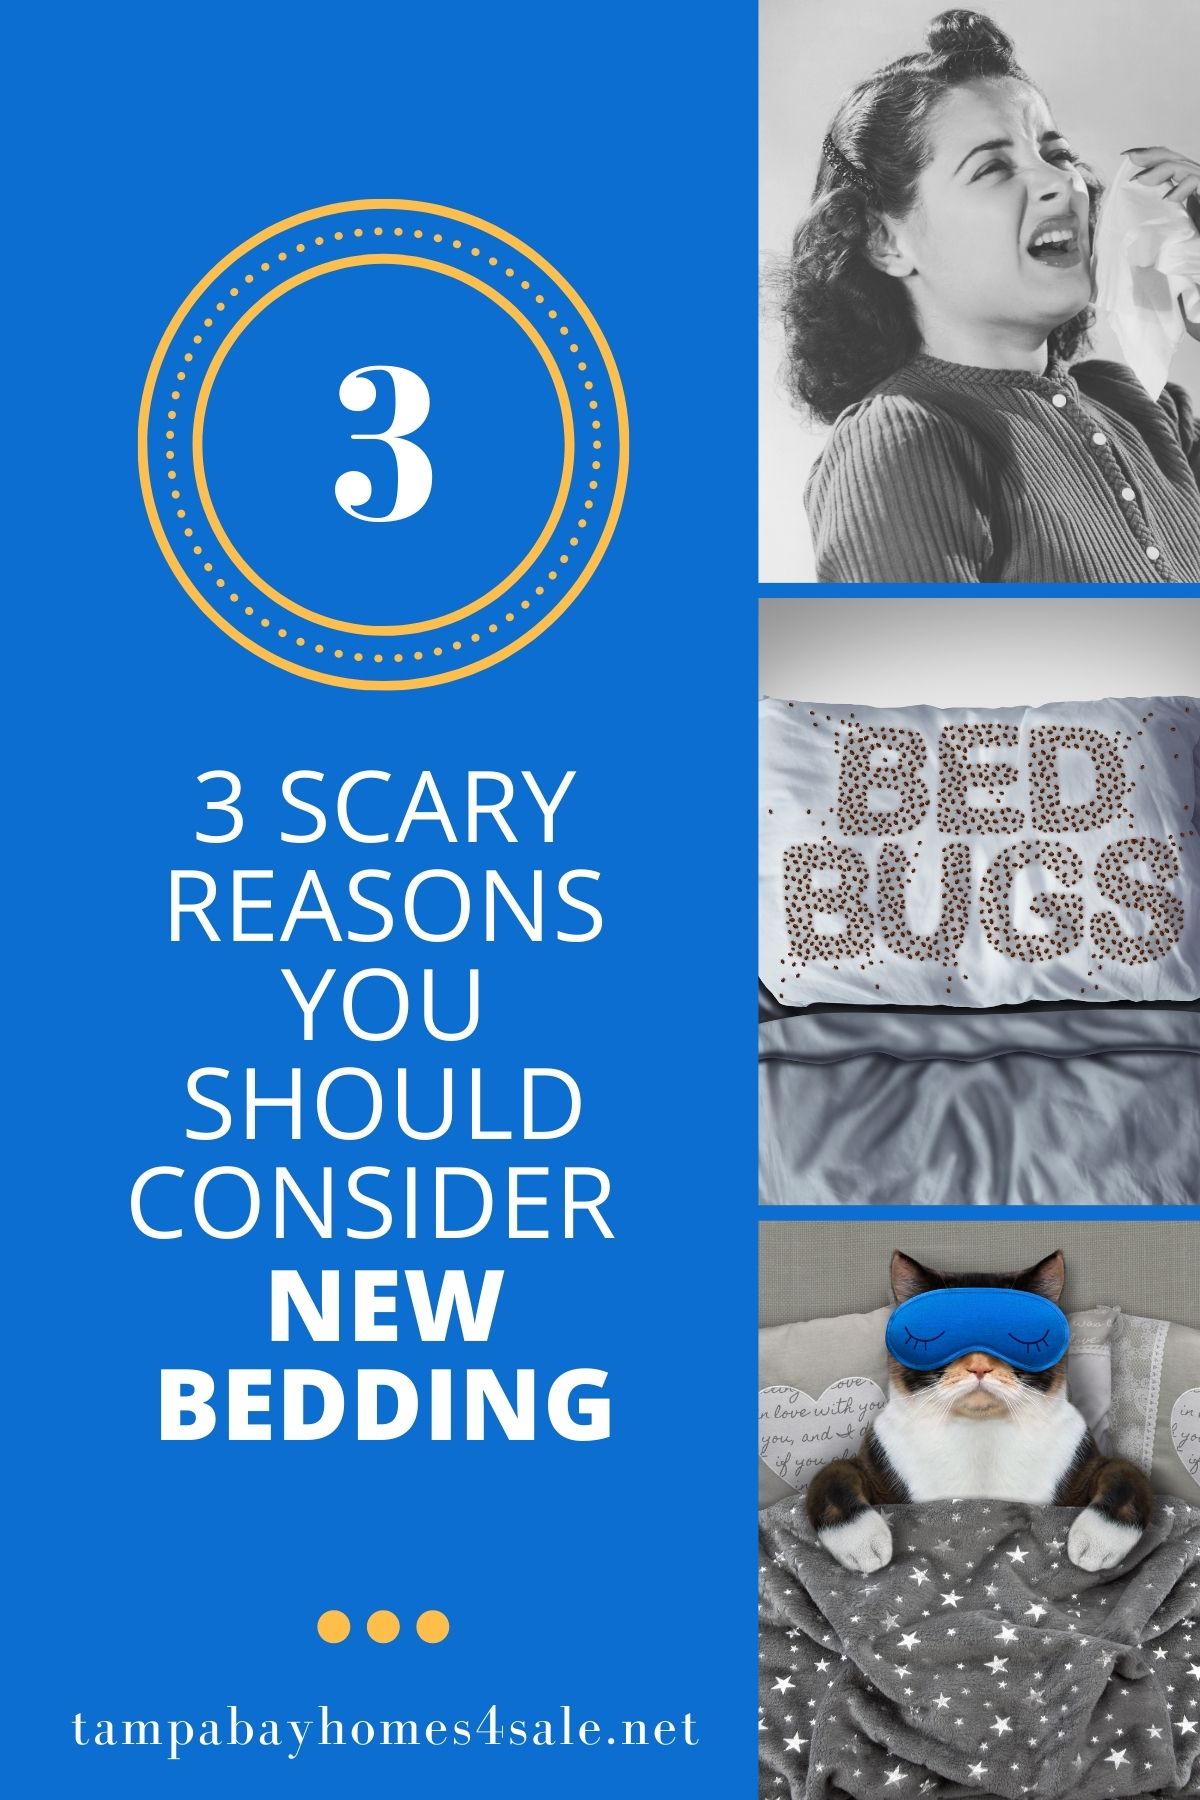 3 Scary Reasons You Should Consider New Bedding